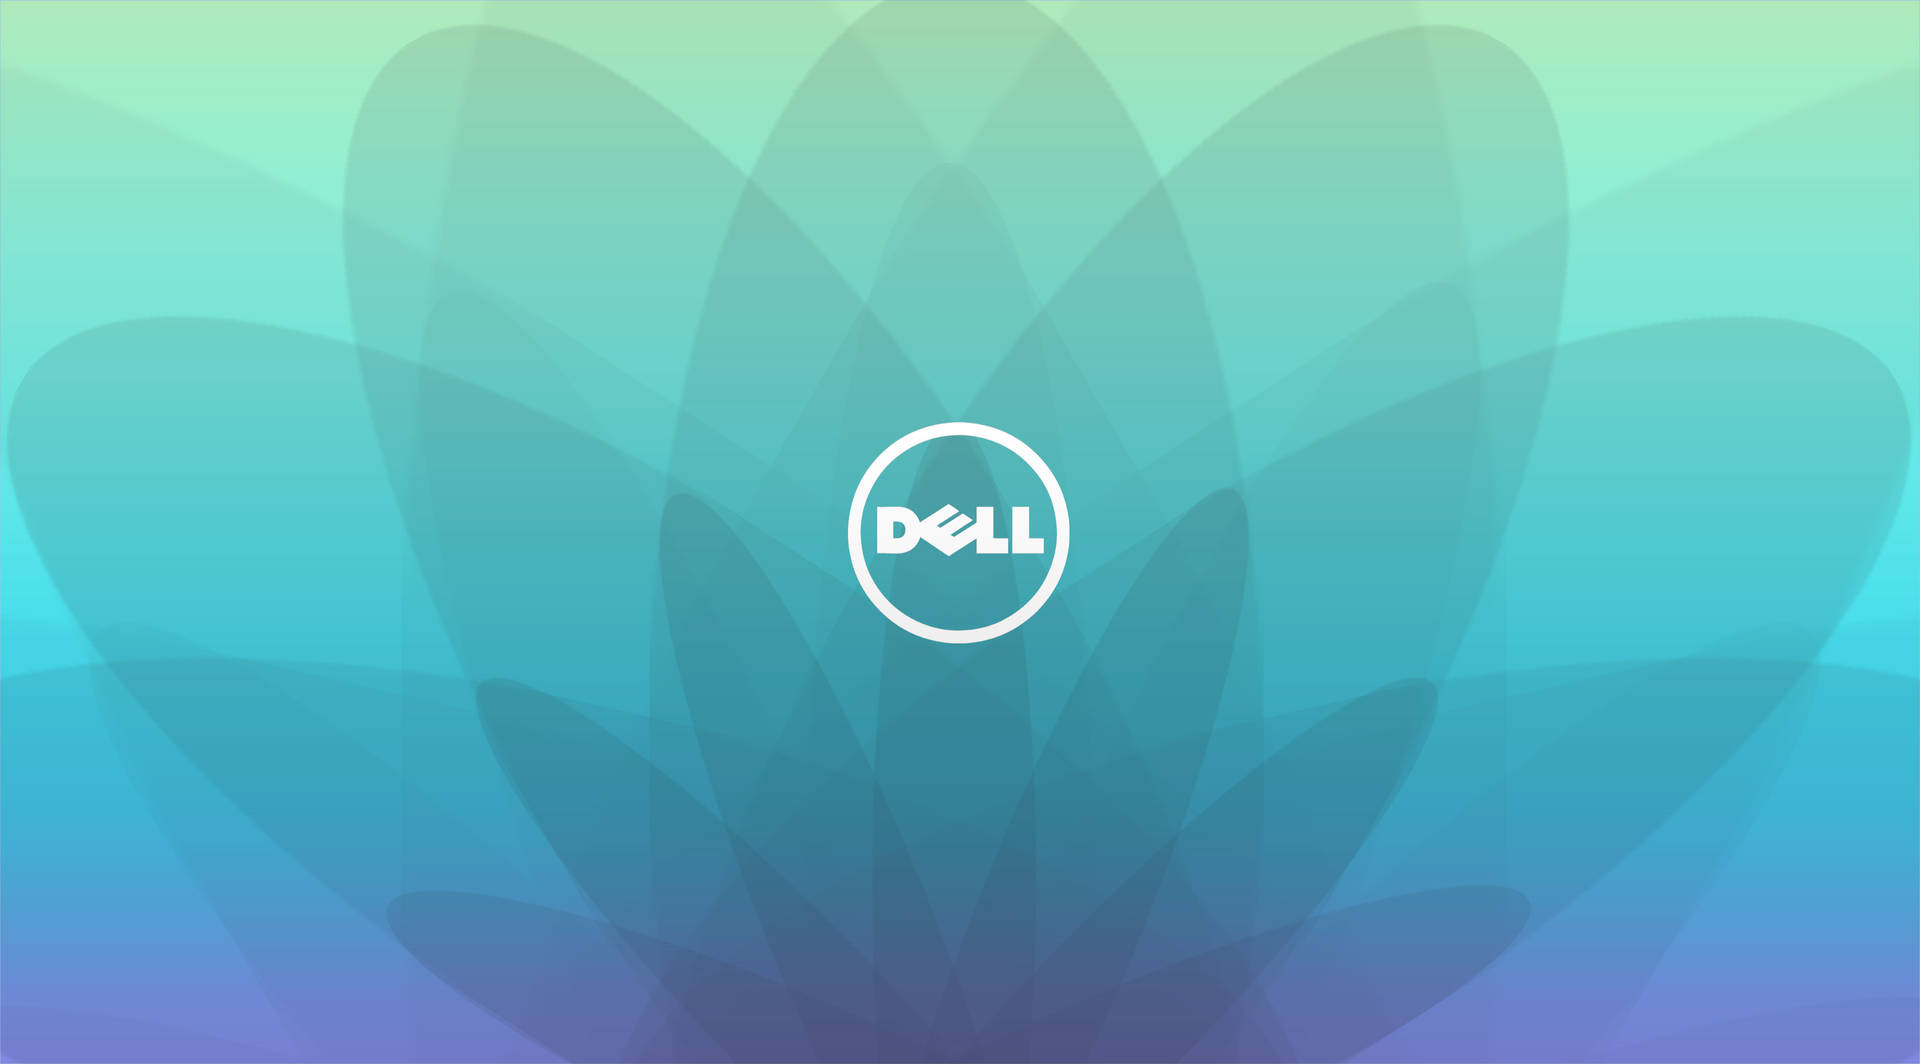 Cool Dell 4k Background Picture